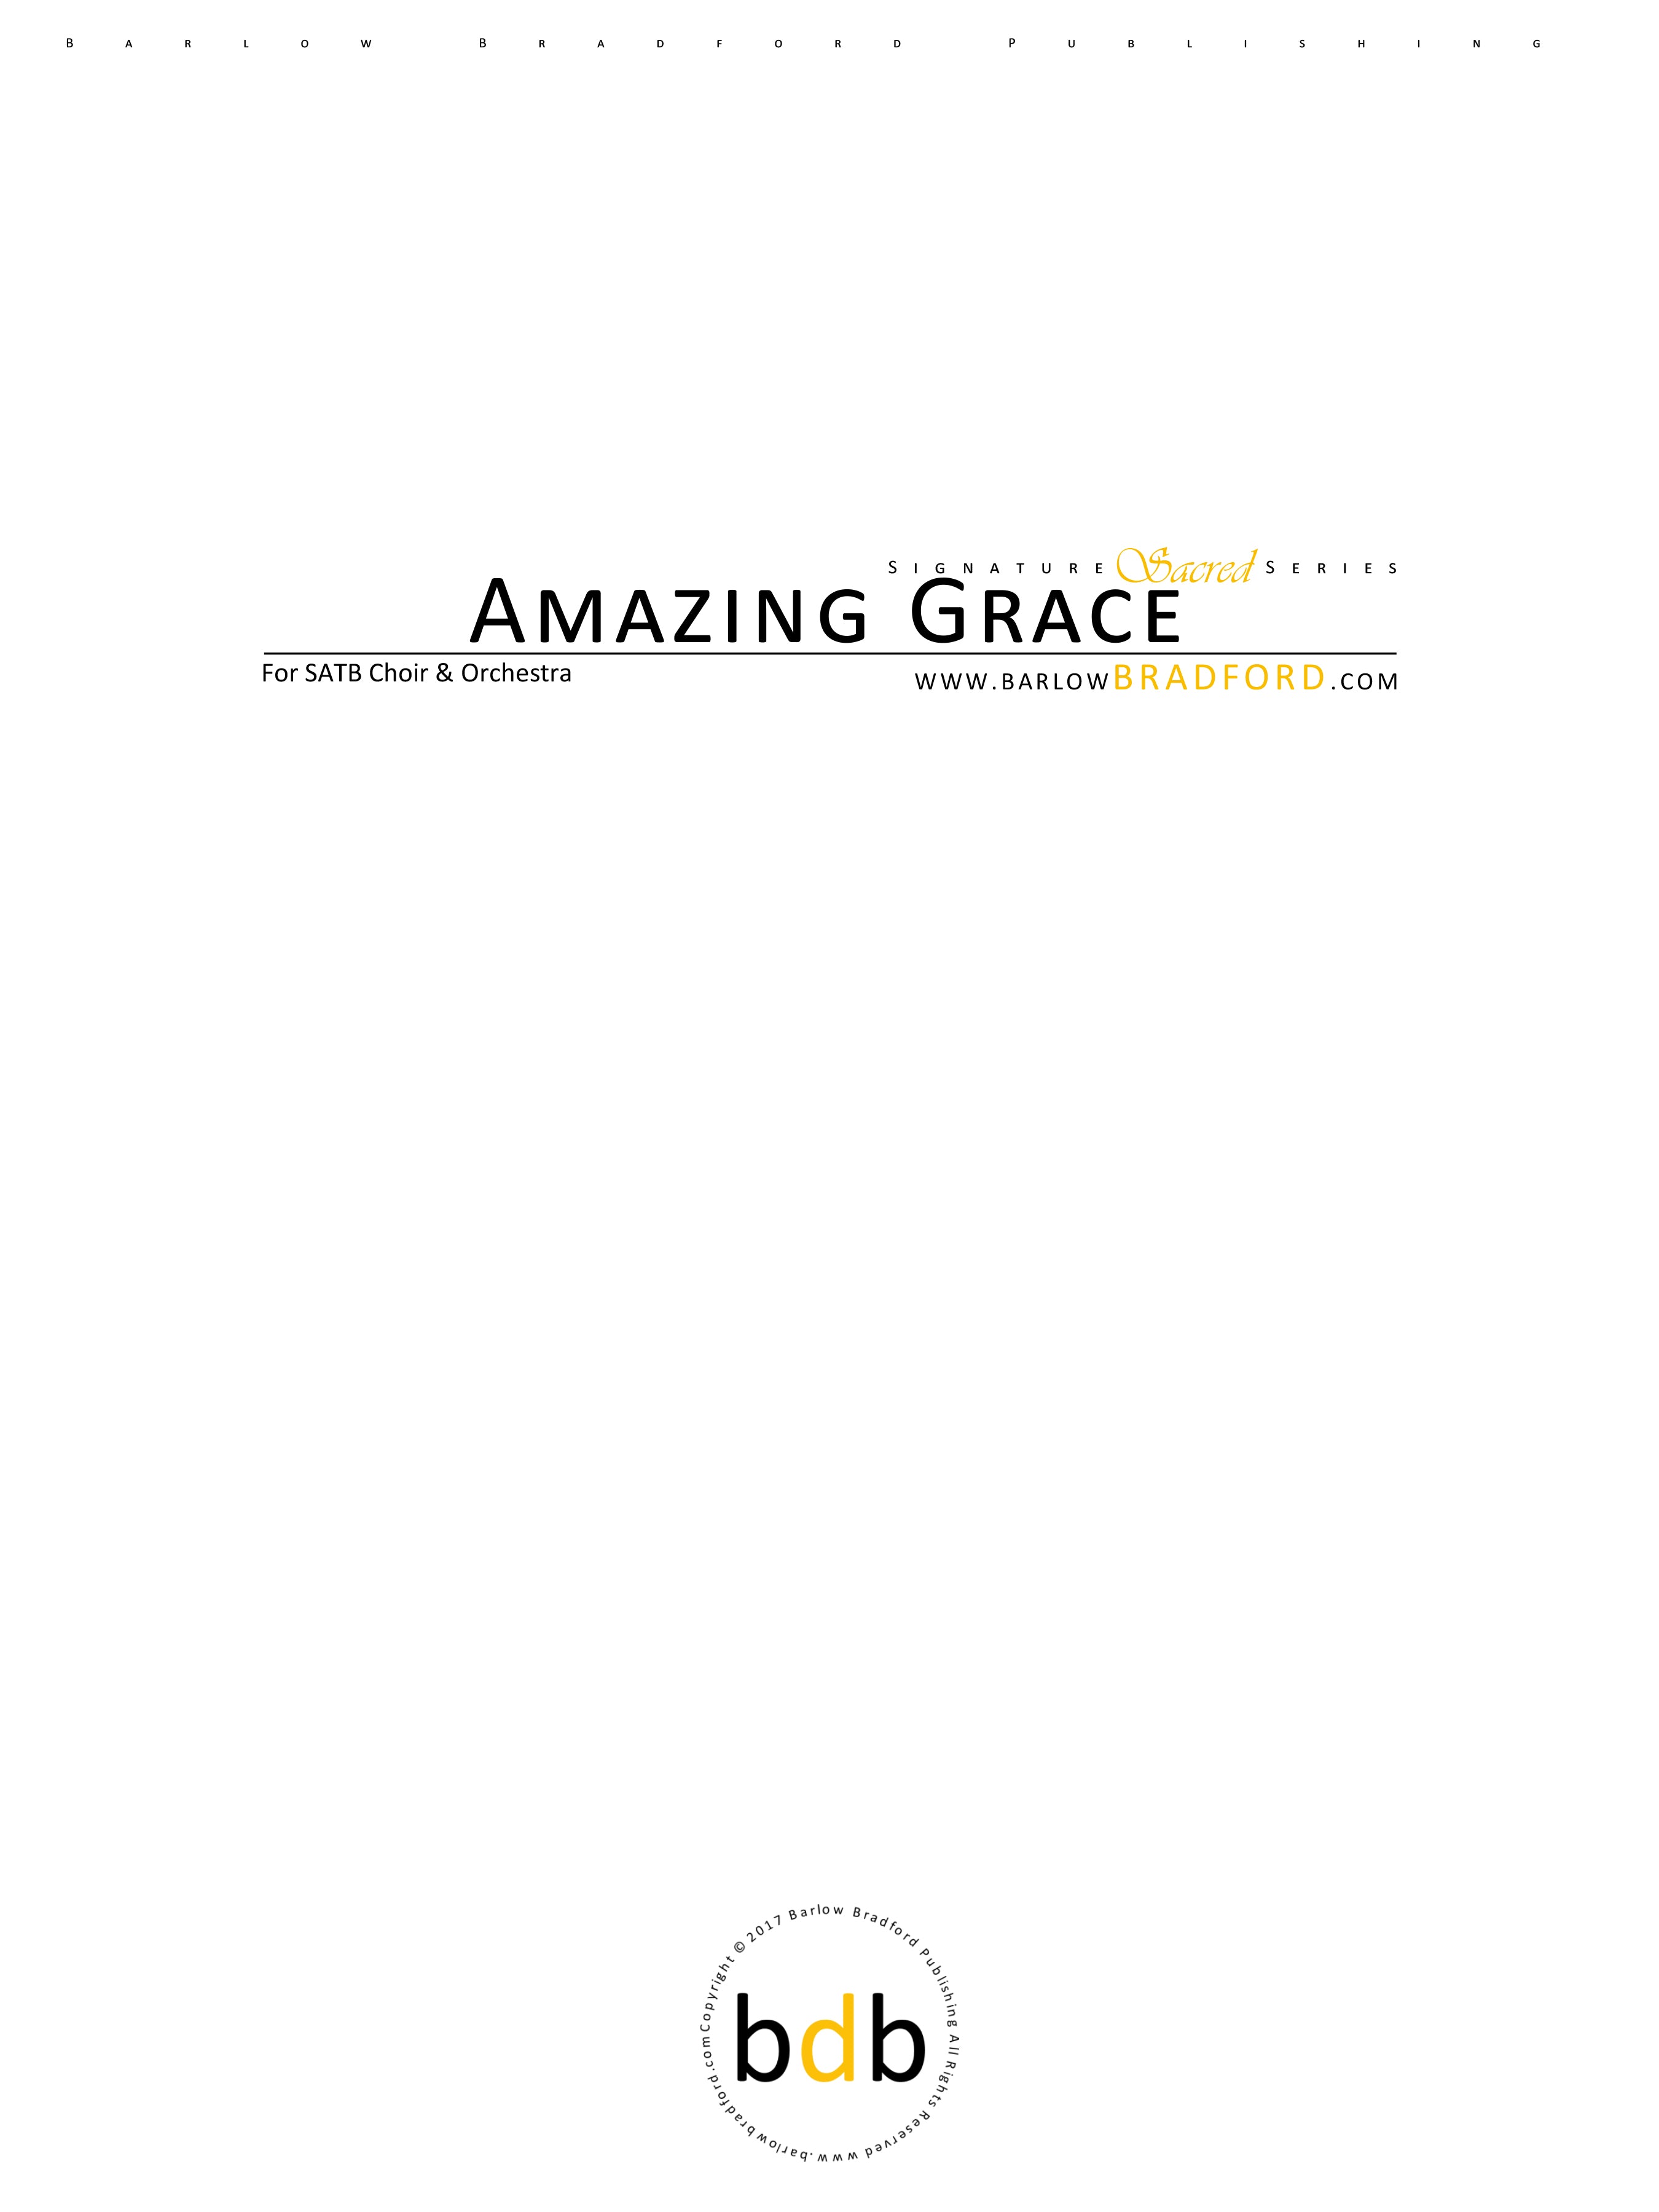 Amazing Grace and Shape-Note Singing, Articles and Essays, Amazing Grace, Digital Collections